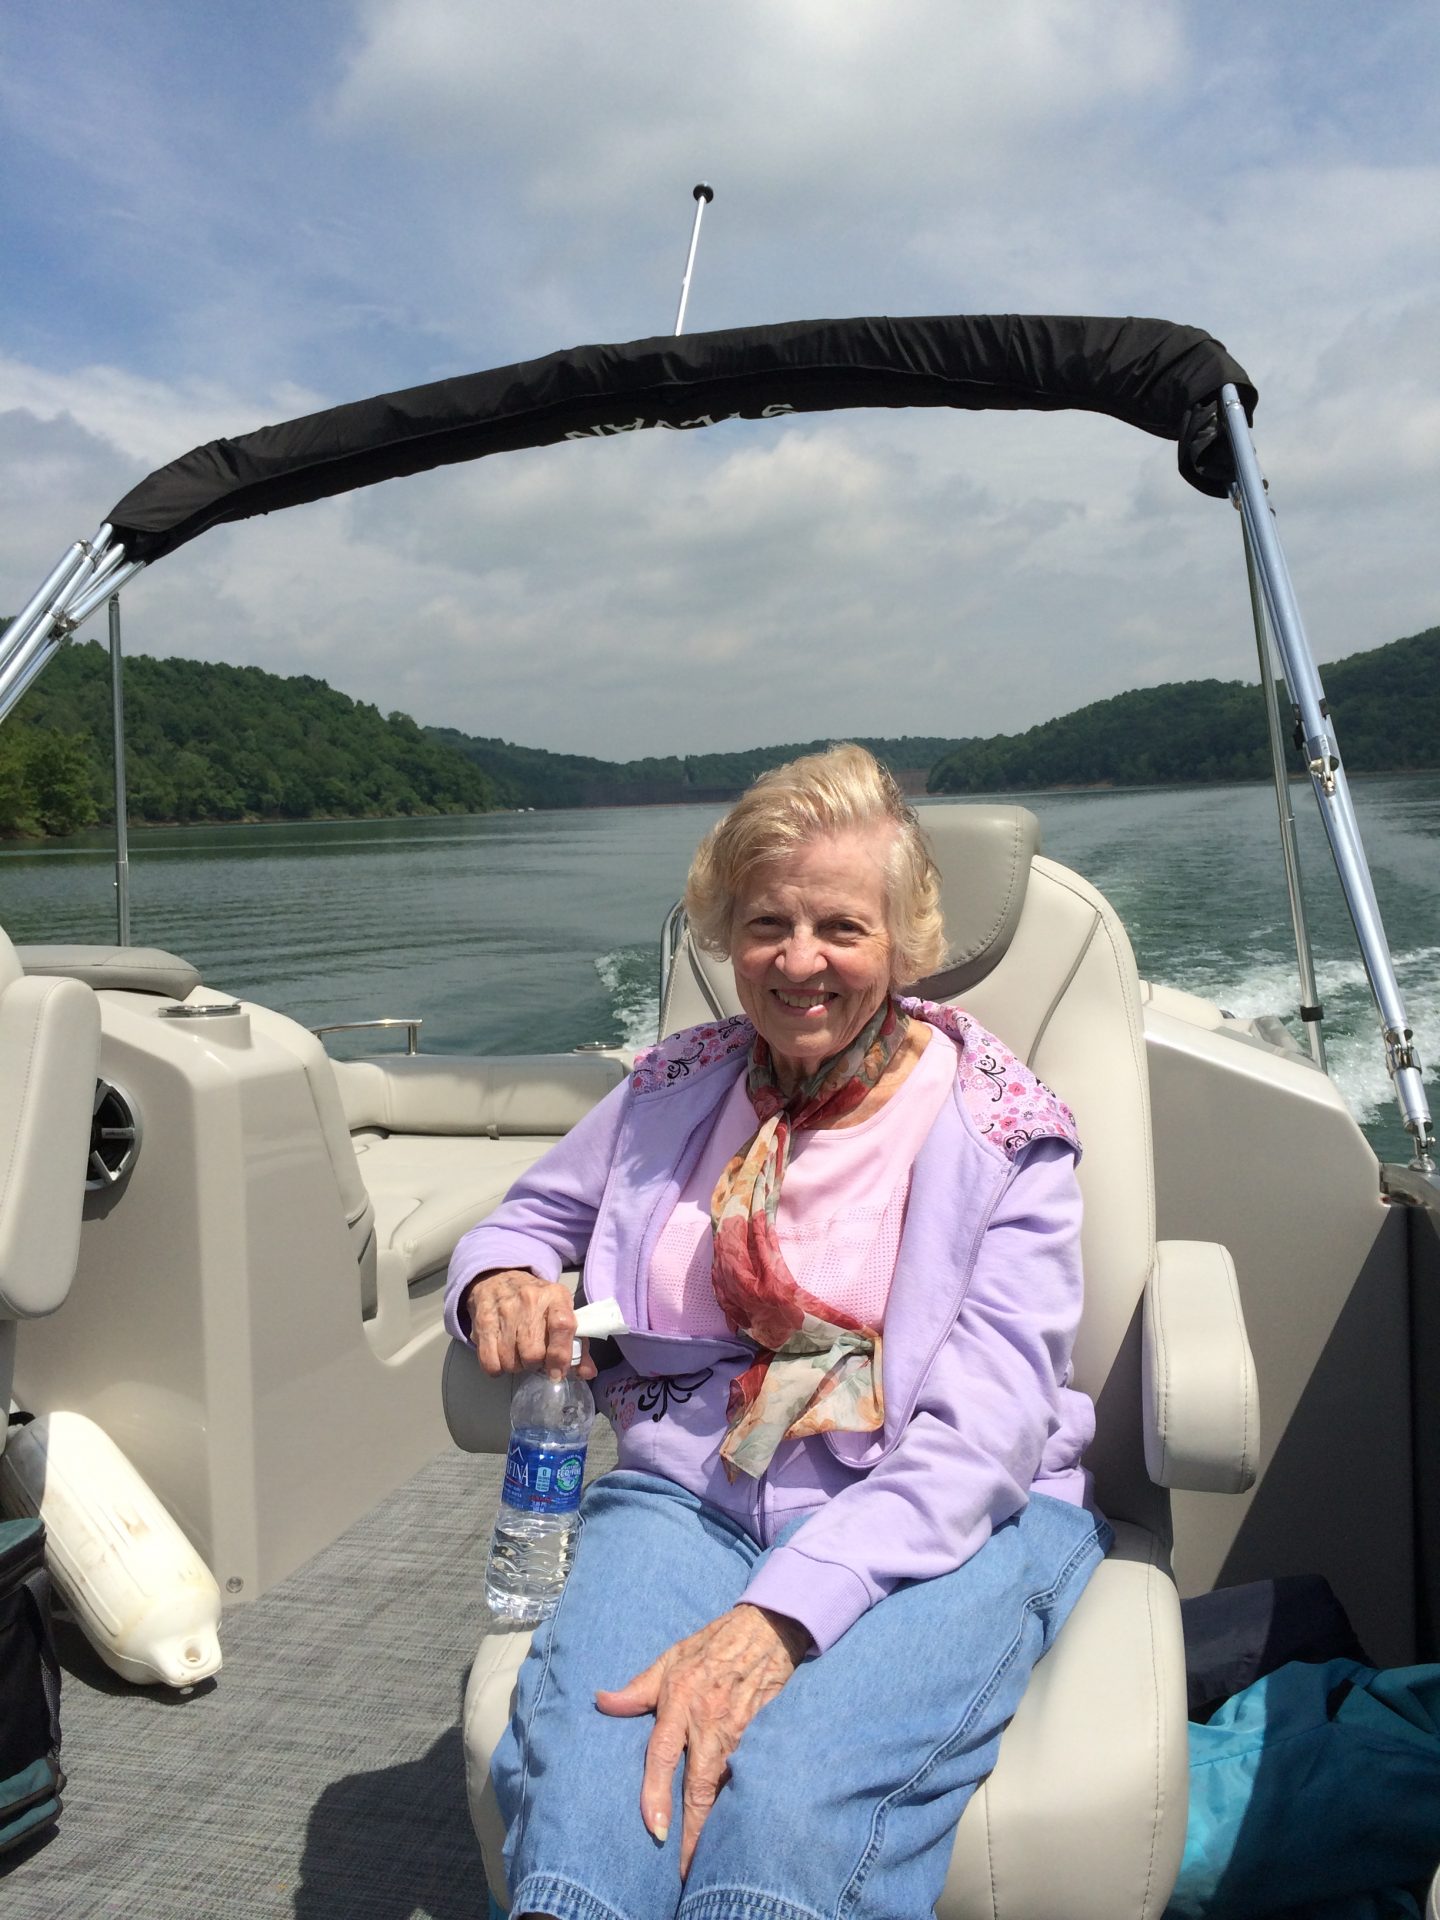 Tygart Lake <br />
Her favorite place to be.